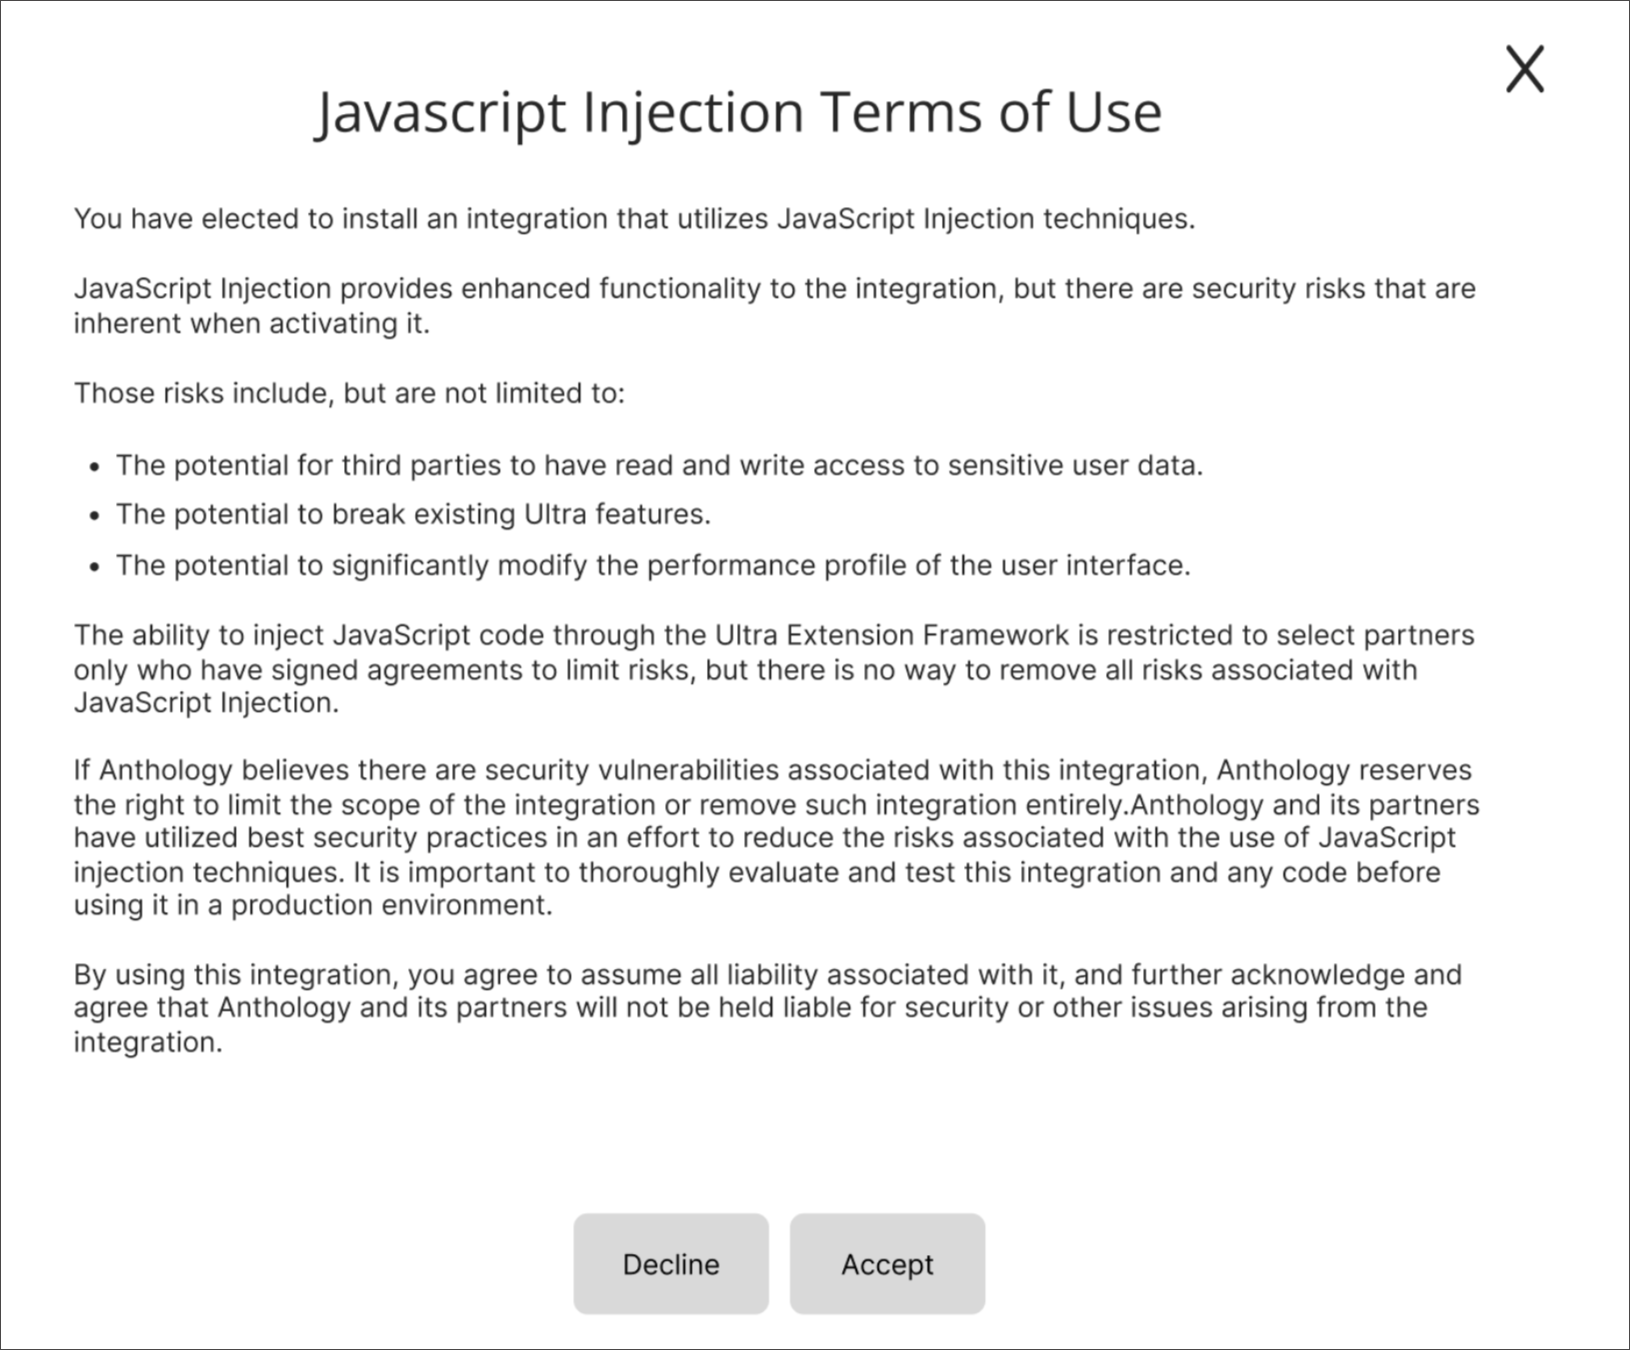 JavaScript Injection Terms of Use Warning Message